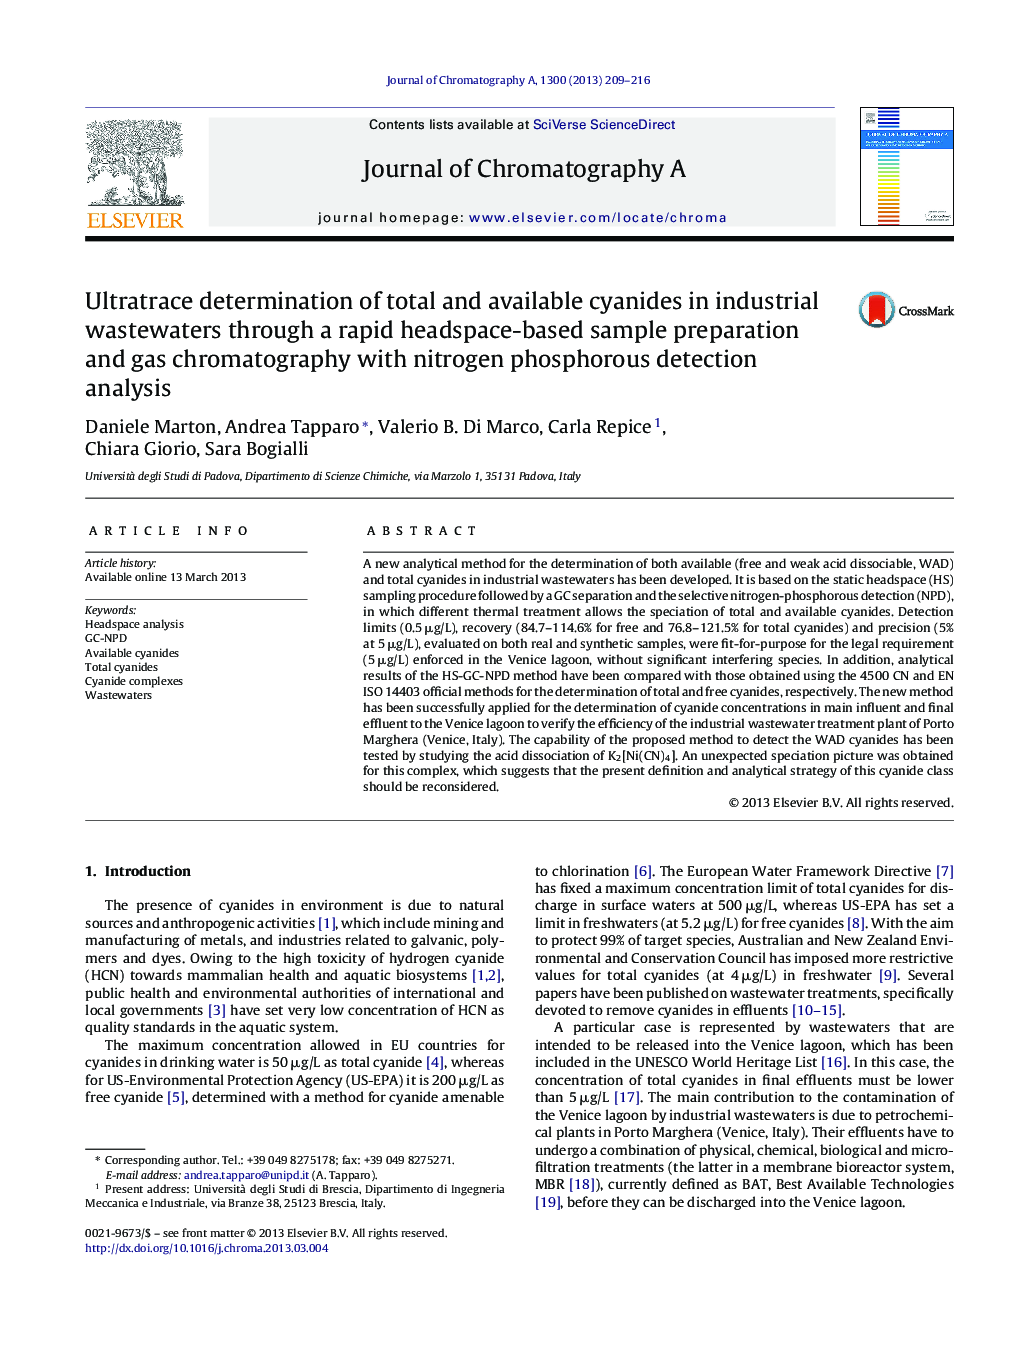 Ultratrace determination of total and available cyanides in industrial wastewaters through a rapid headspace-based sample preparation and gas chromatography with nitrogen phosphorous detection analysis